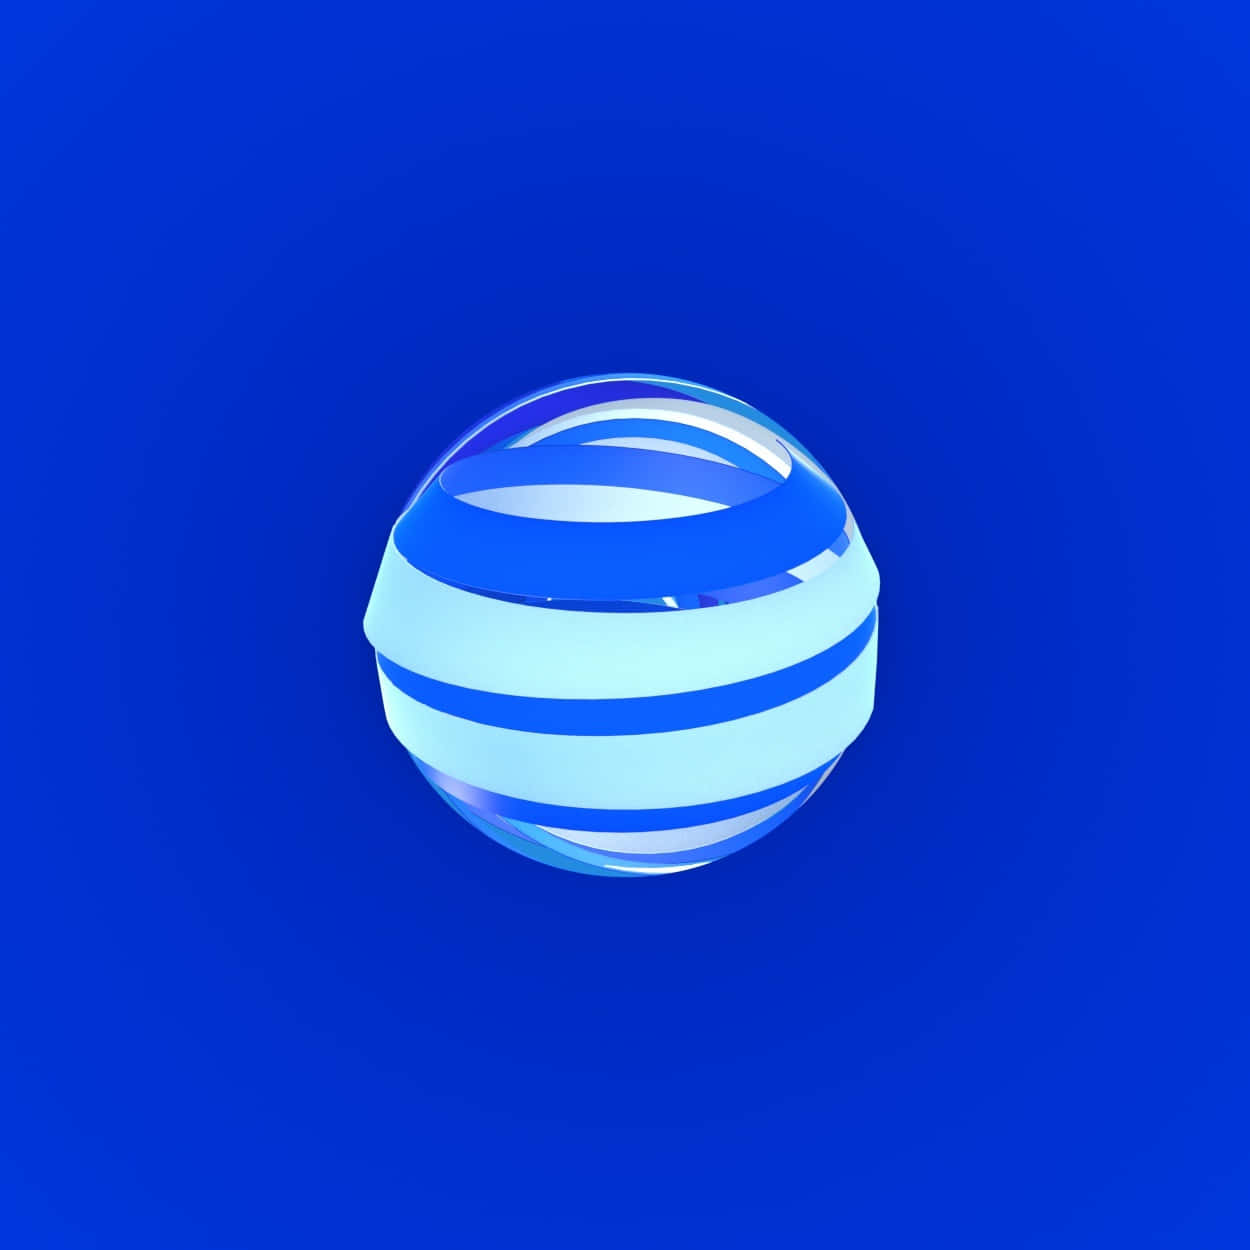 A Blue Sphere With A Blue Background Wallpaper